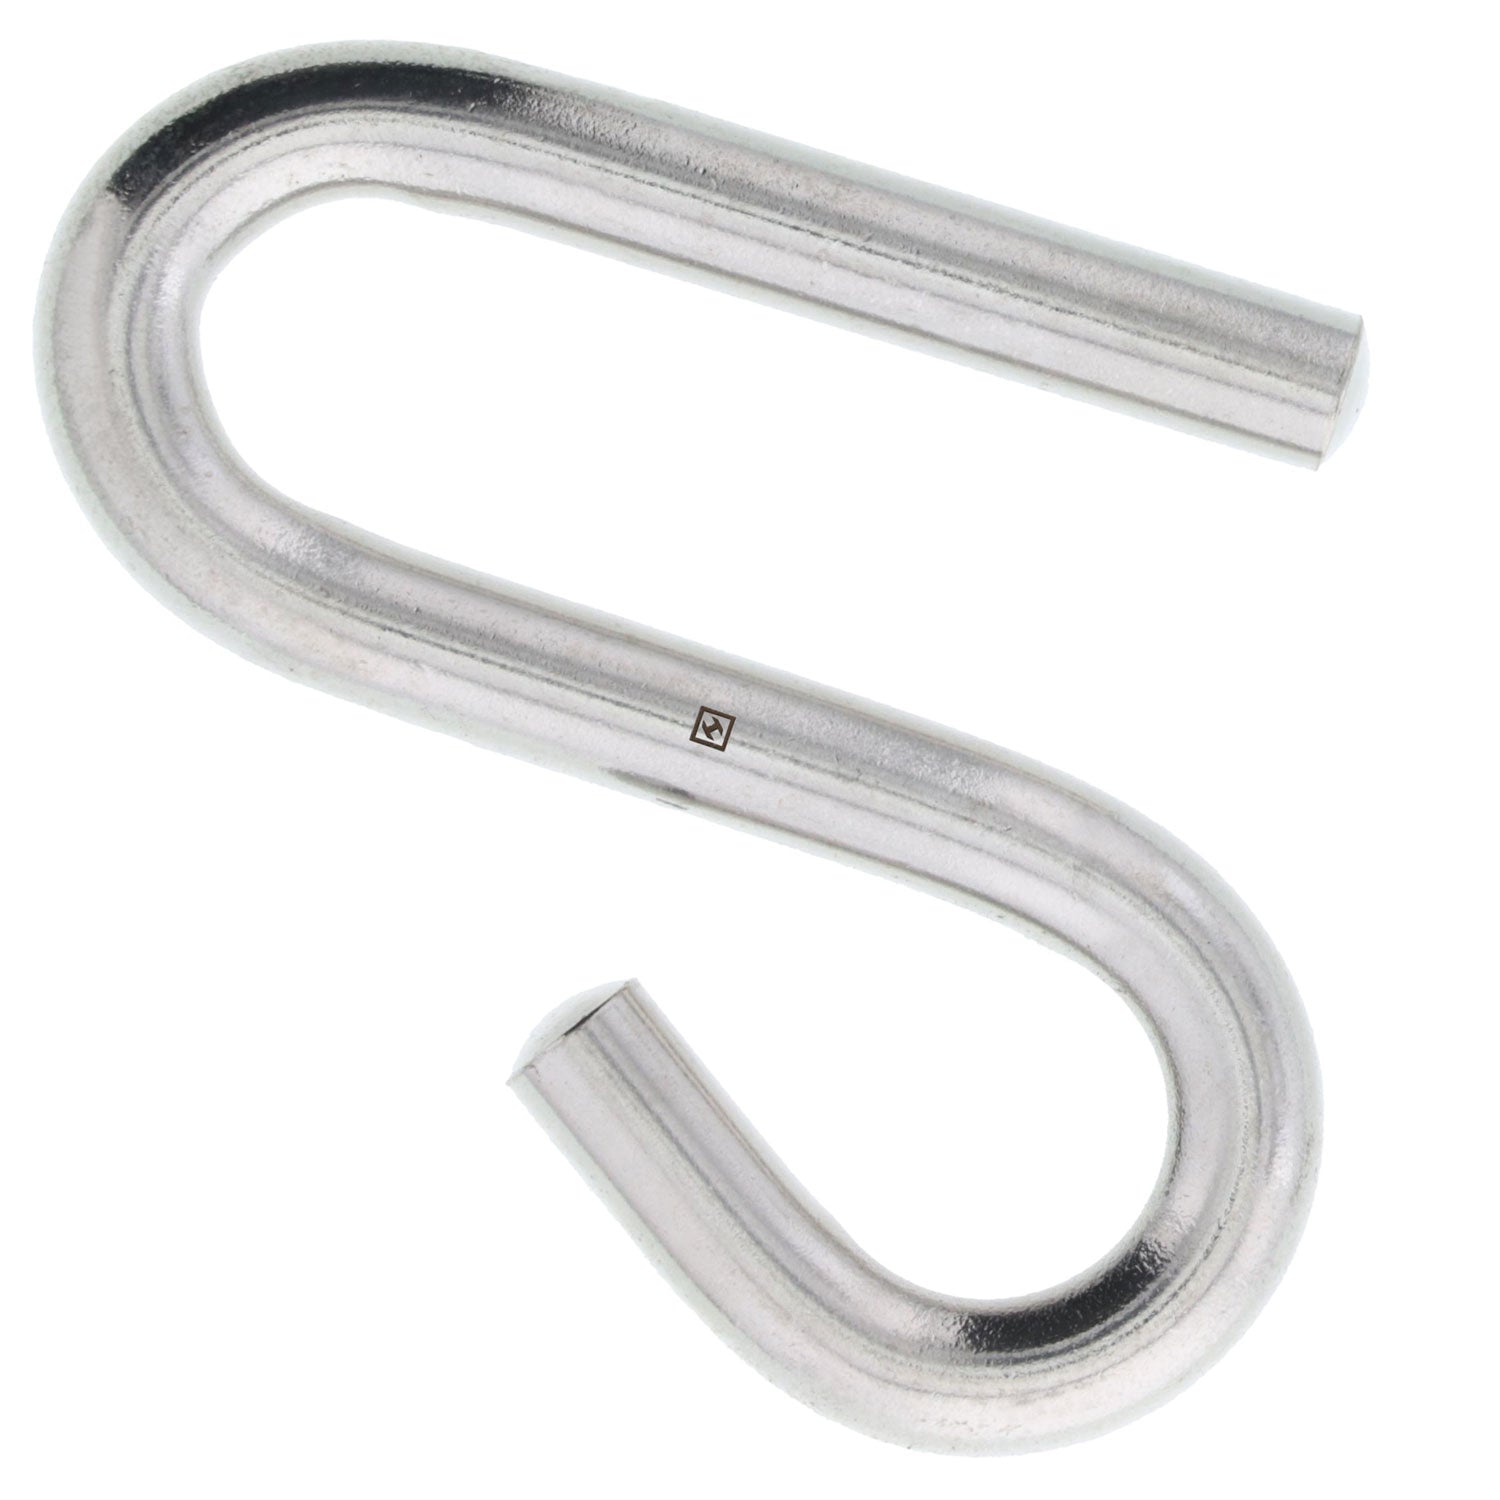 1/4 x 2-1/4 Stainless Steel Long Arm S Hook